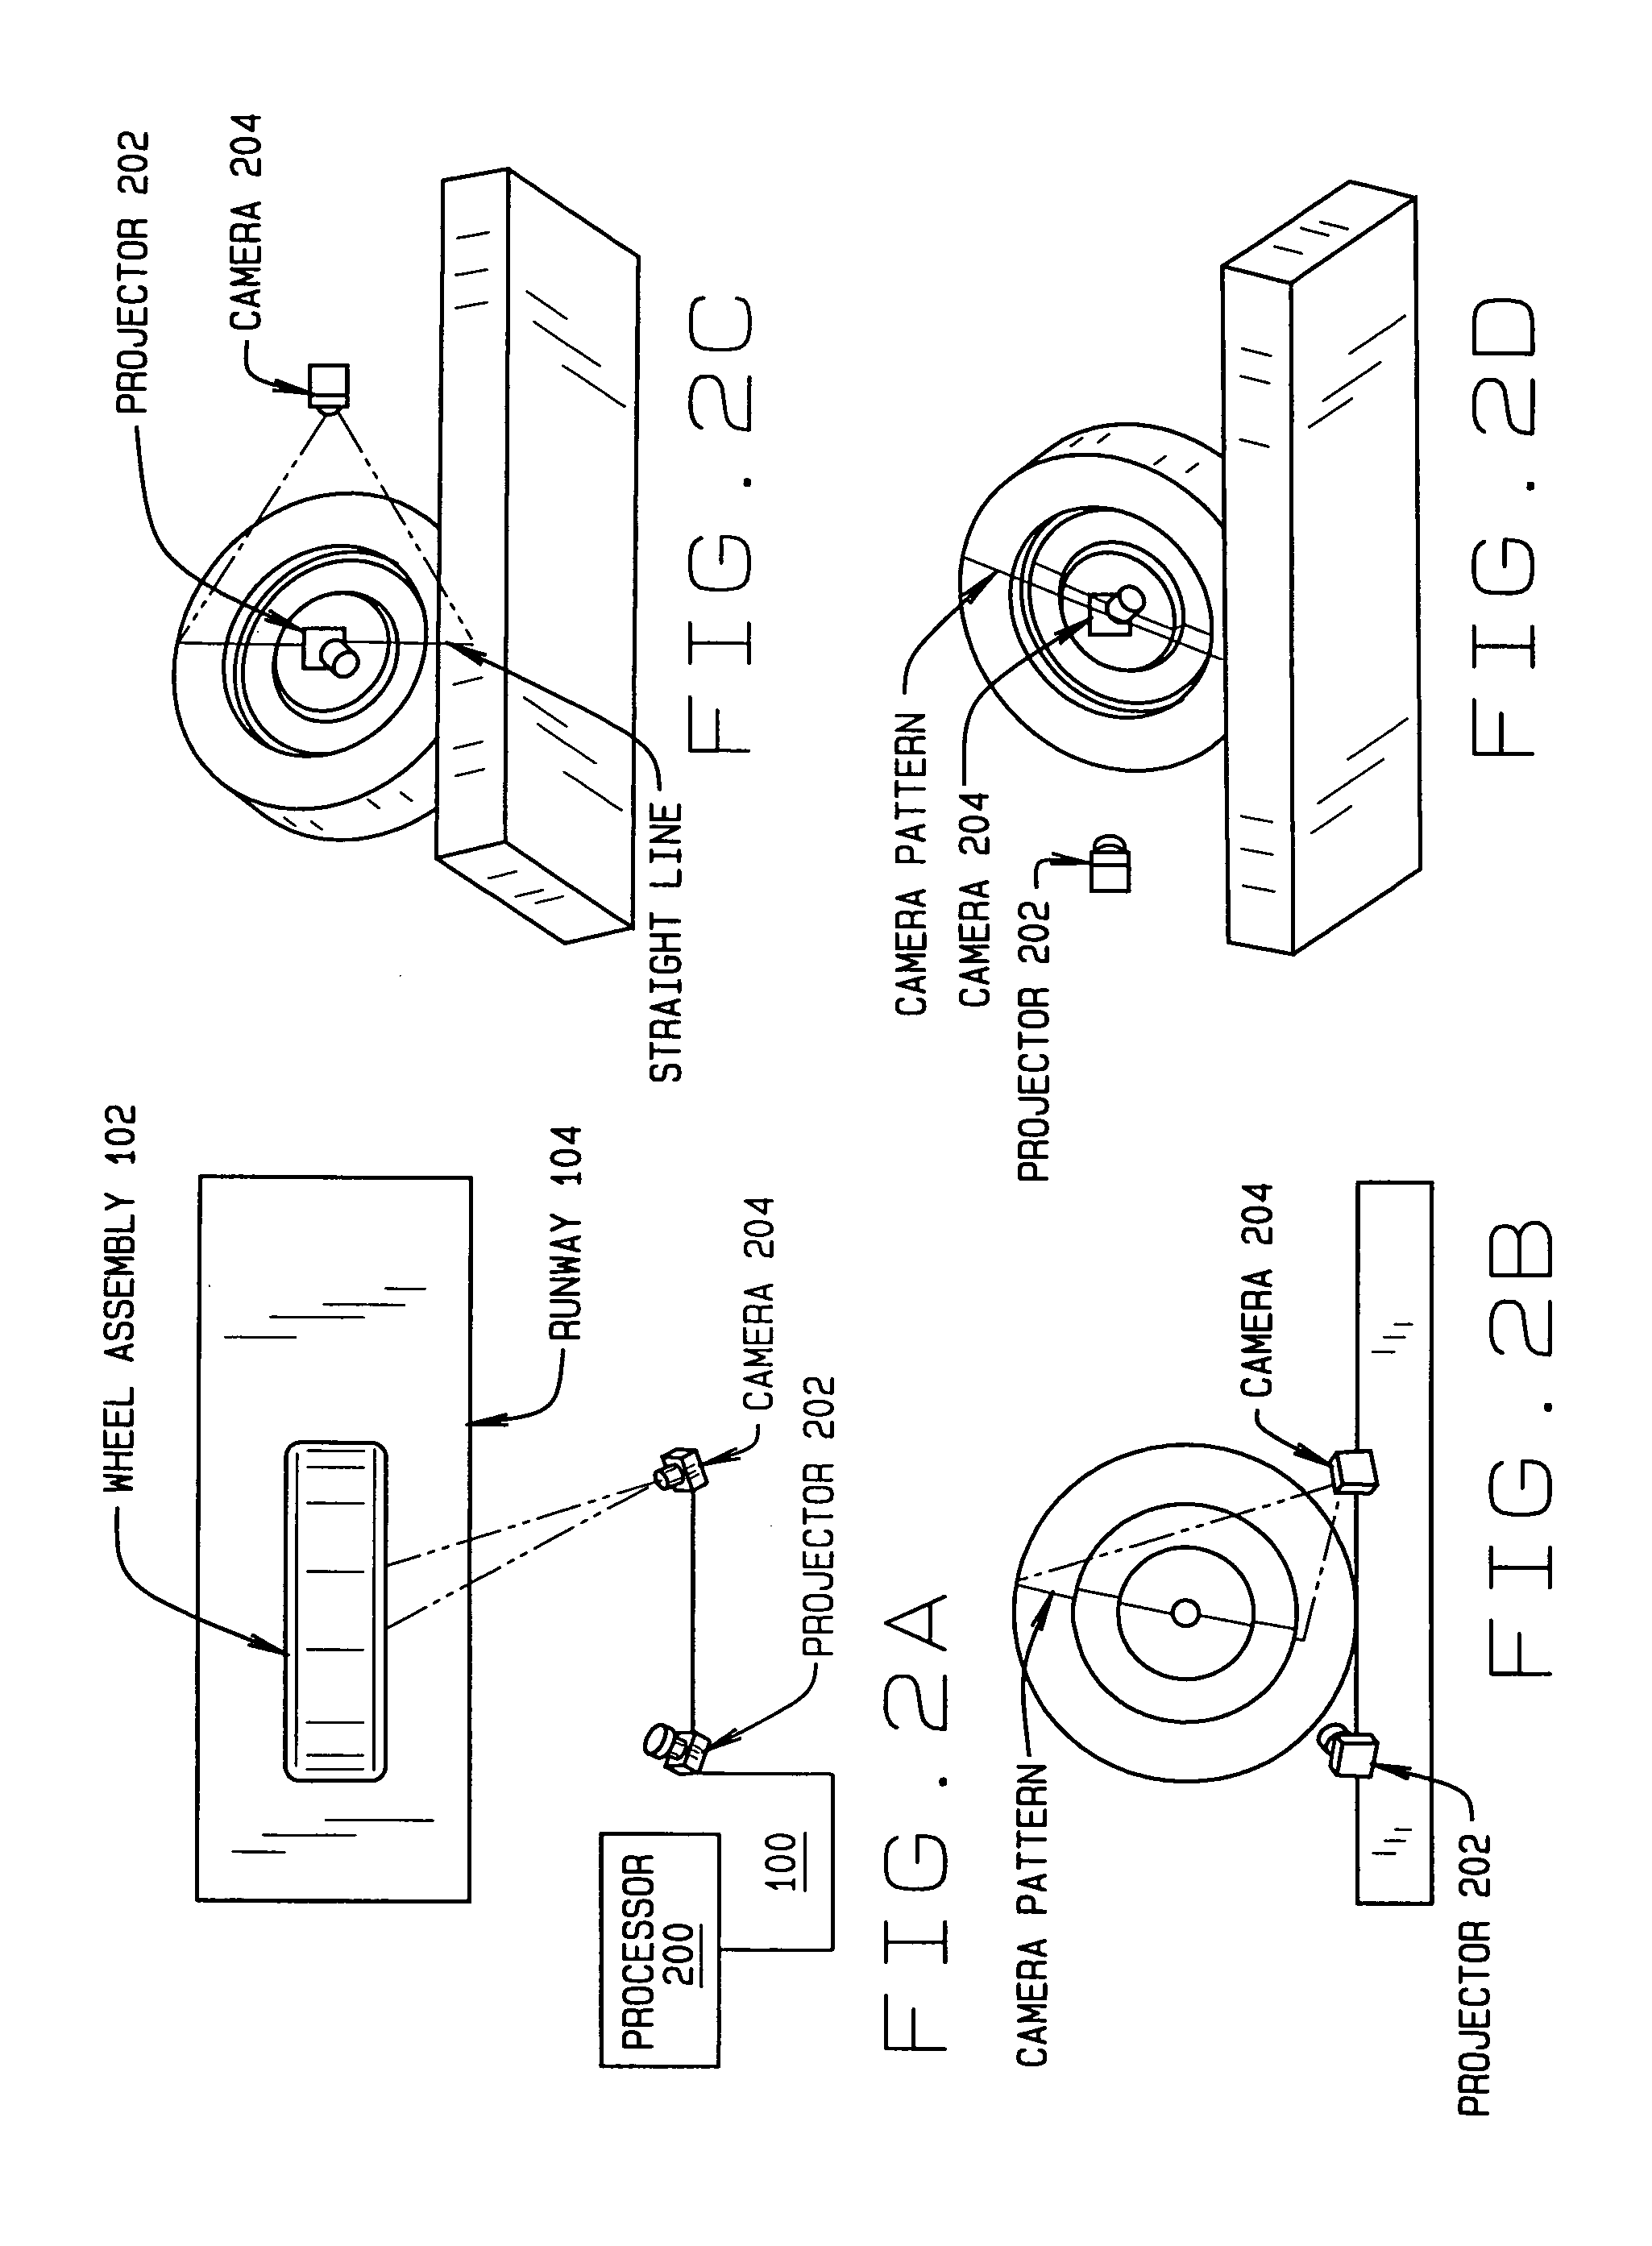 Method and apparatus for wheel alignment system target projection and illumination